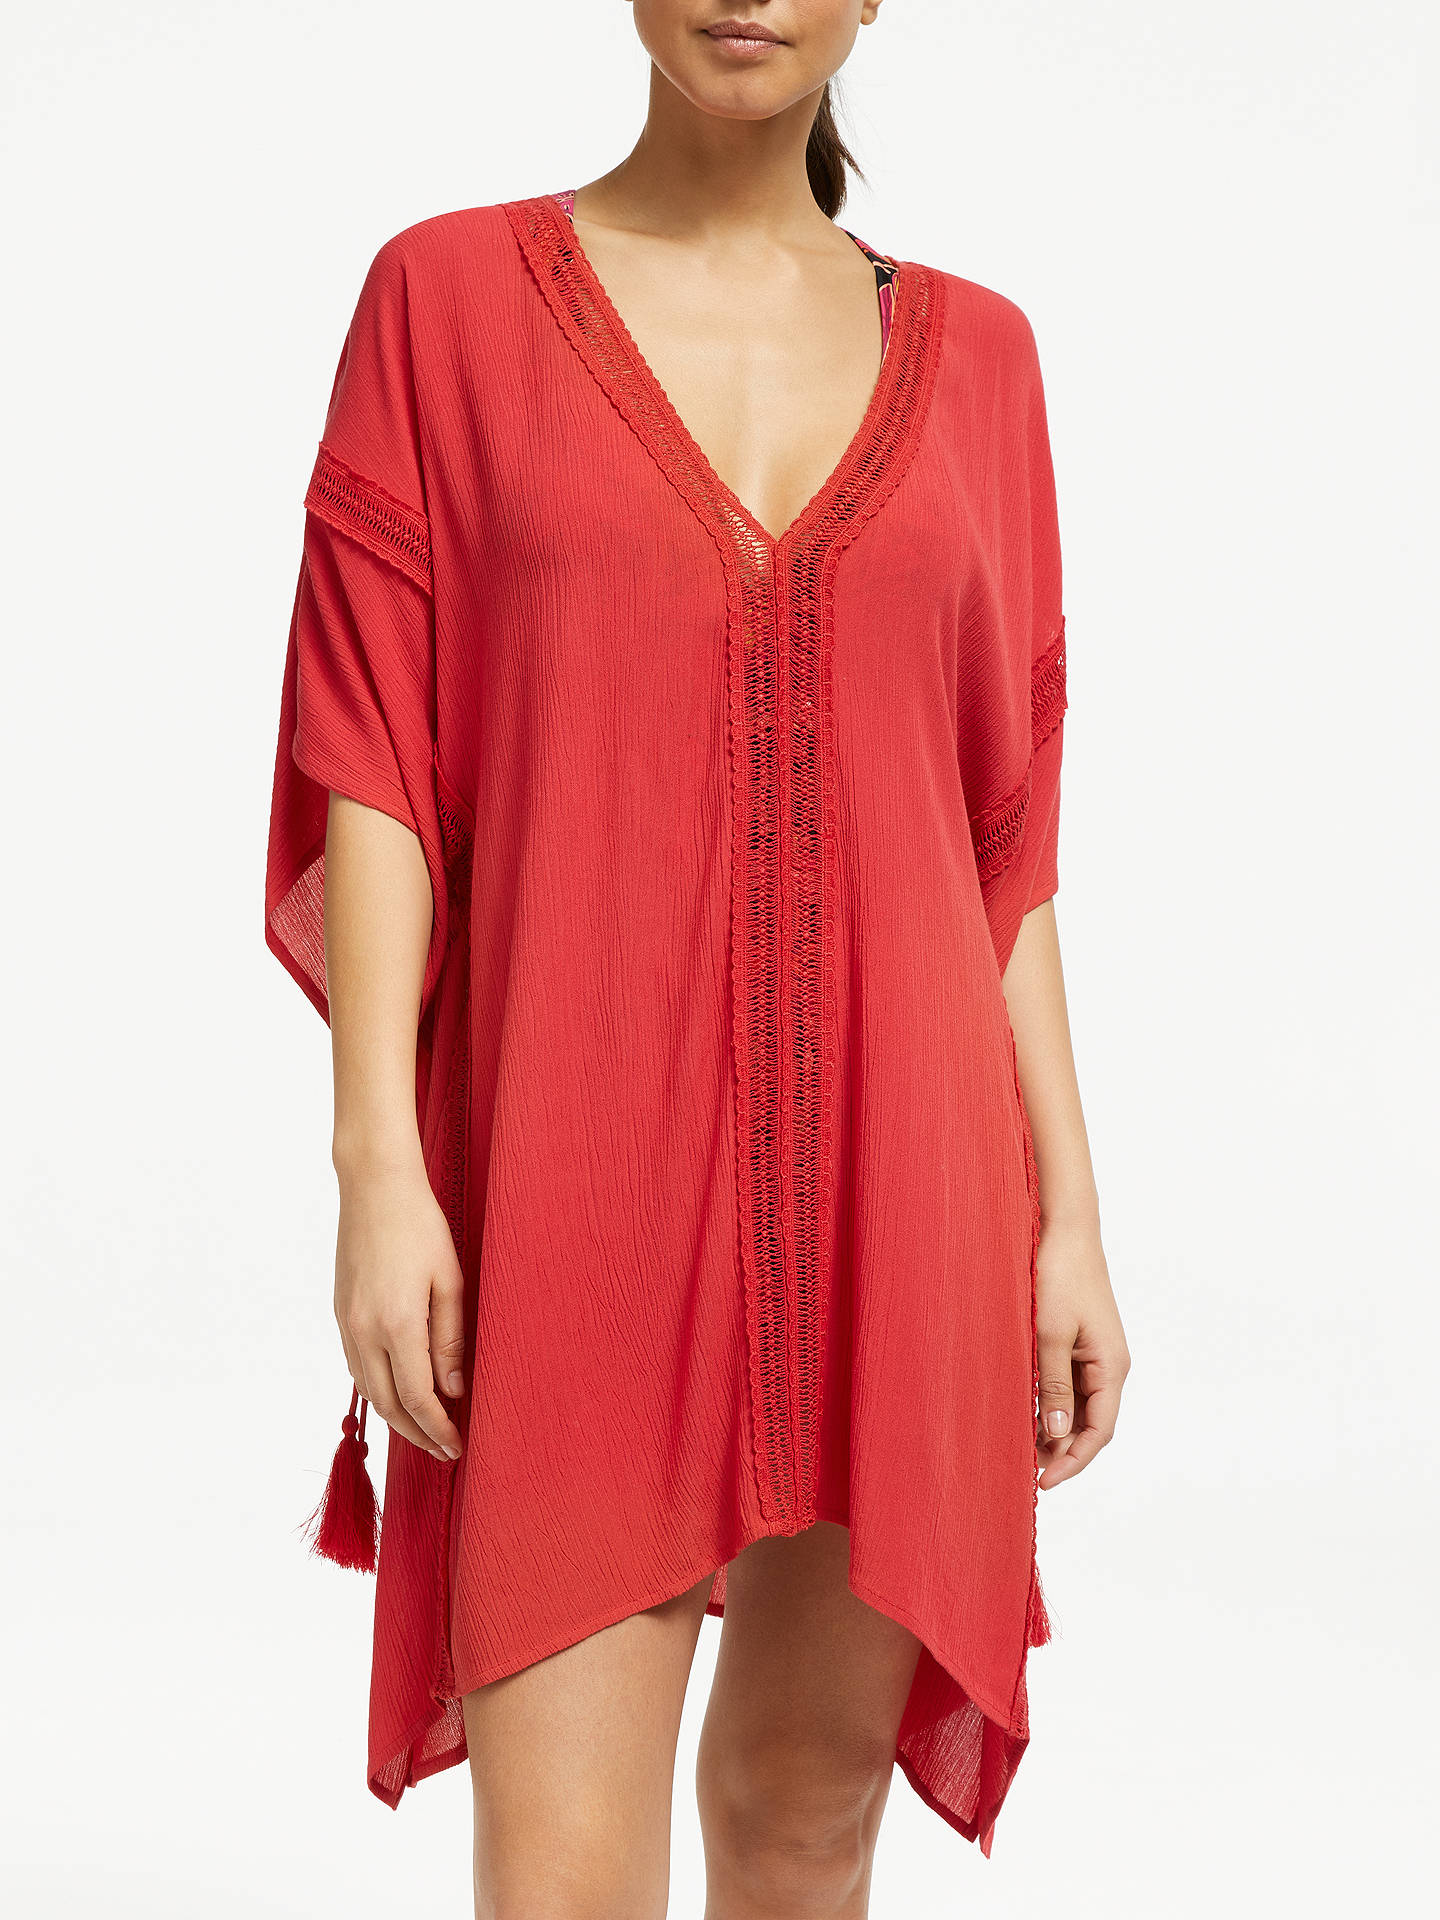 Our Top 5 Summer Kaftans perfect cover ups for the beach! LittleStuff